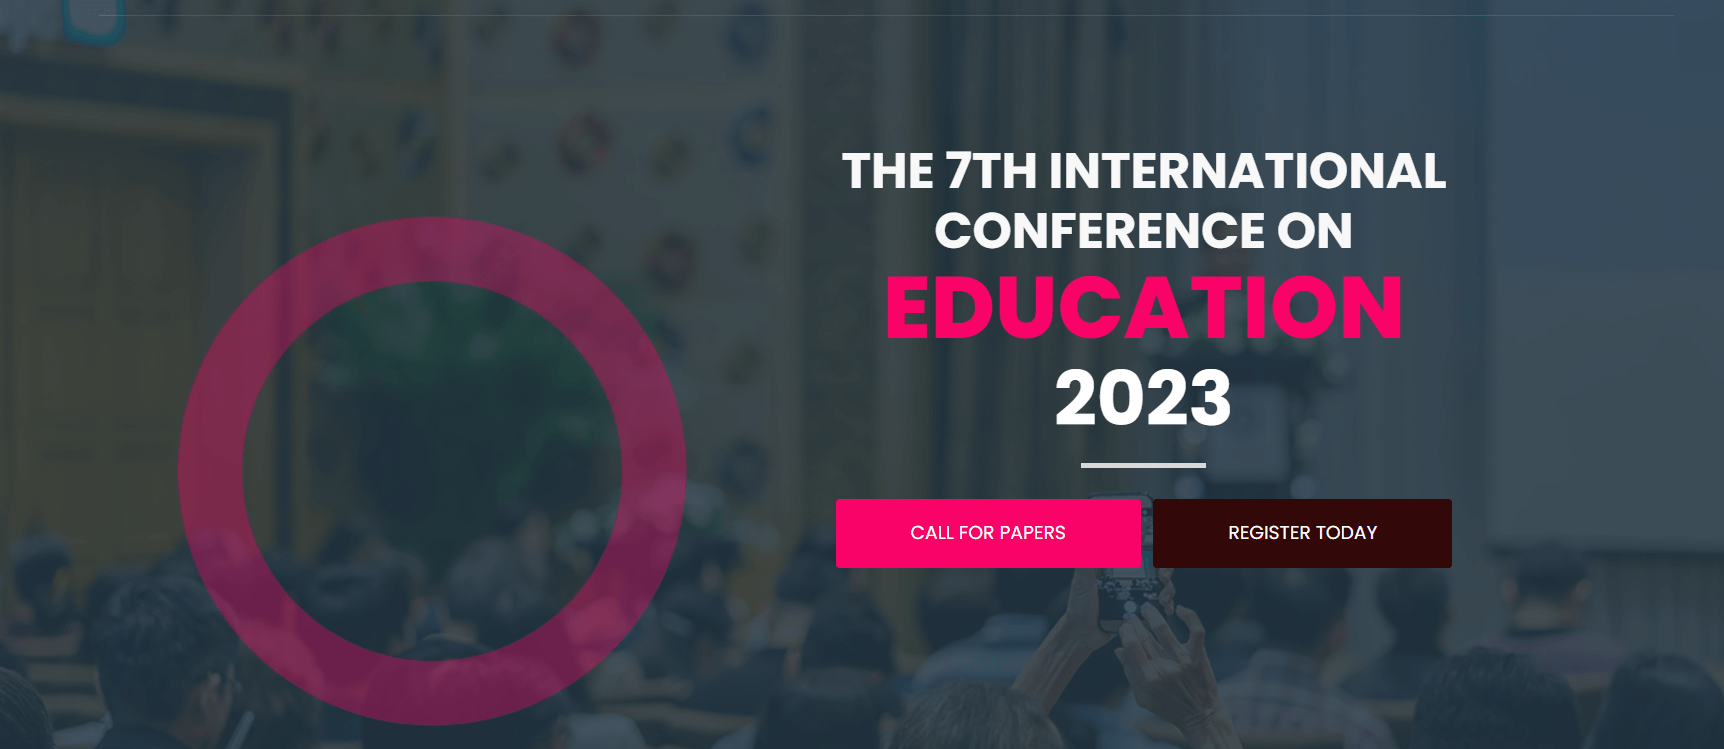 Home - The 9th International Conference on Education 2023